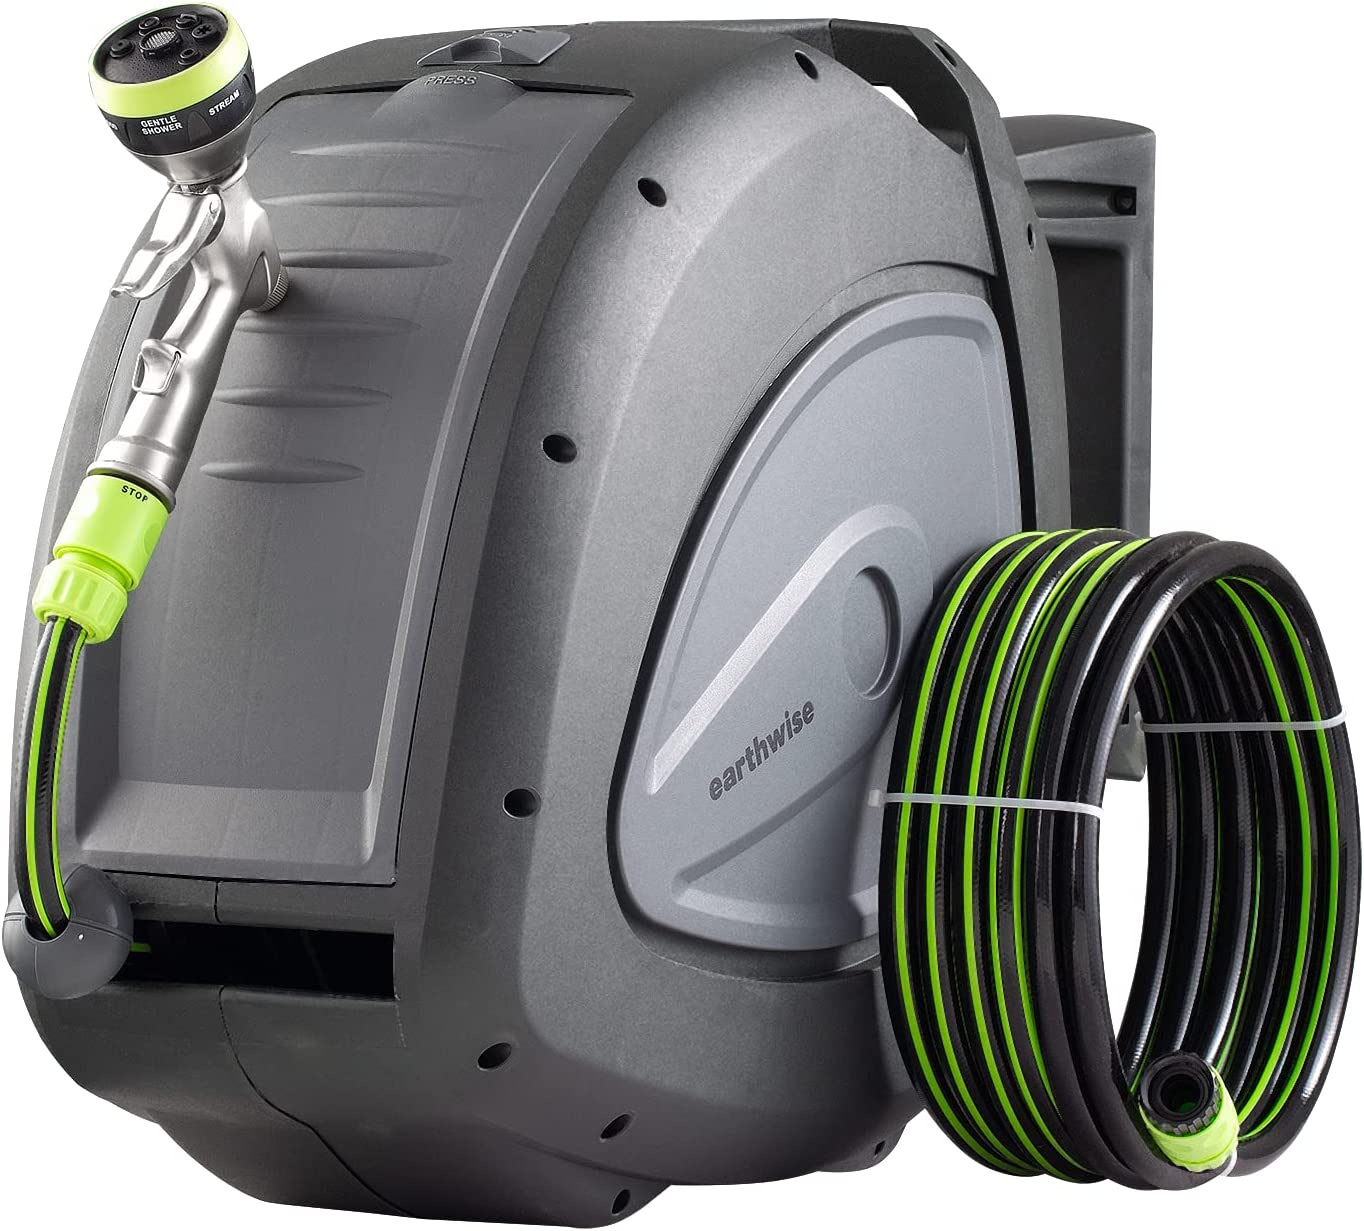 Earthwise 130' Automatic Hose Reel with 7-Setting Metal Hose